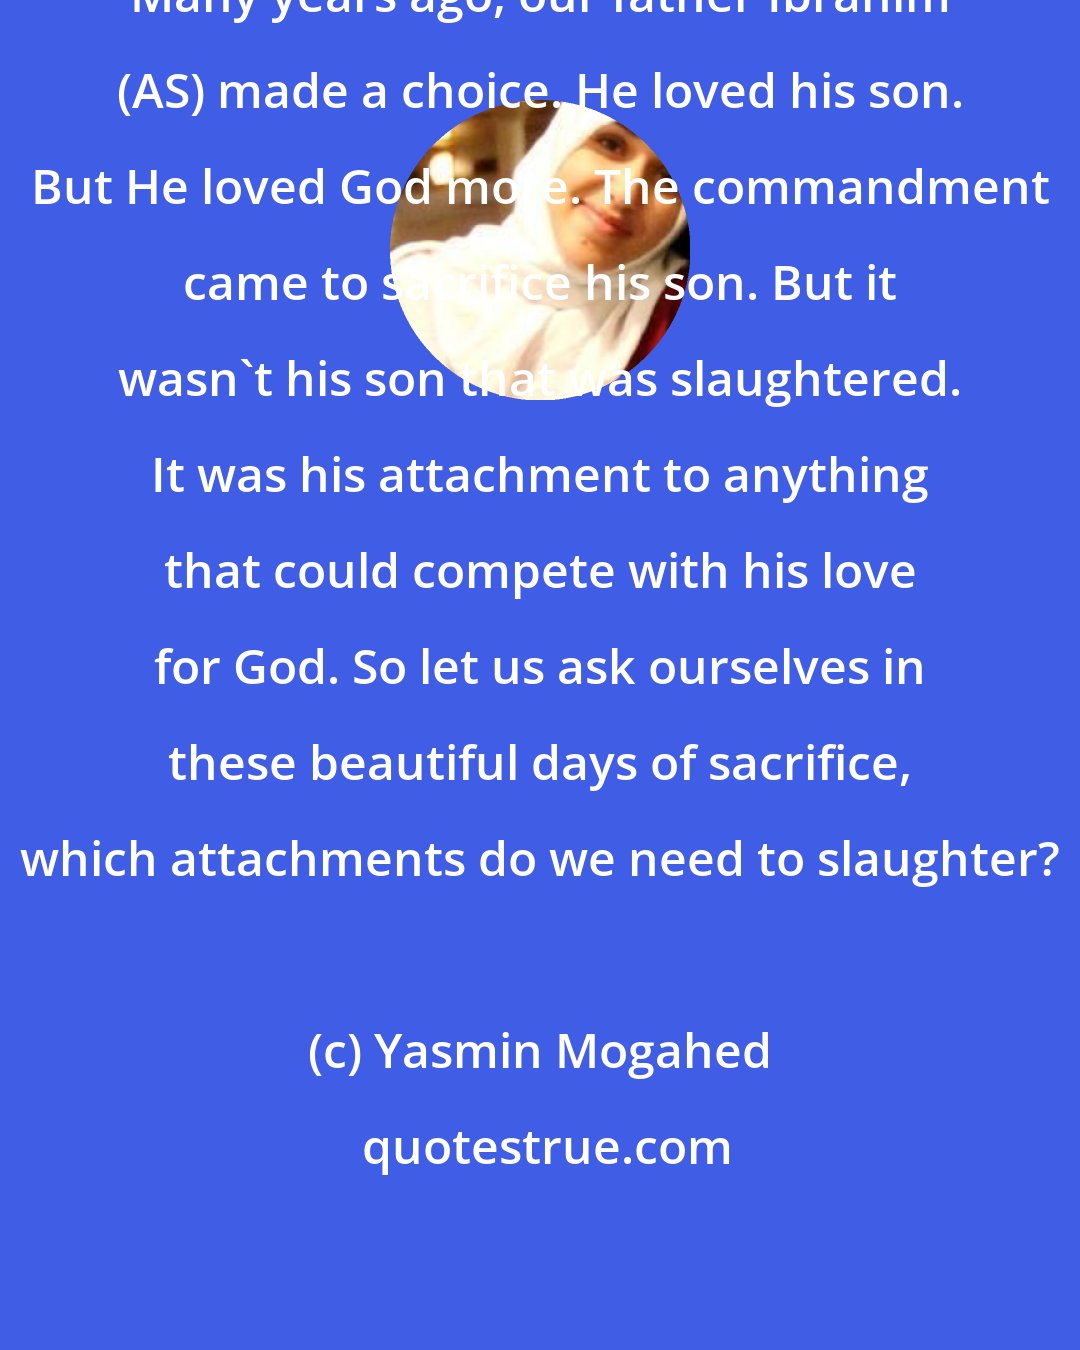 Yasmin Mogahed: Many years ago, our father Ibrahim (AS) made a choice. He loved his son. But He loved God more. The commandment came to sacrifice his son. But it wasn't his son that was slaughtered. It was his attachment to anything that could compete with his love for God. So let us ask ourselves in these beautiful days of sacrifice, which attachments do we need to slaughter?